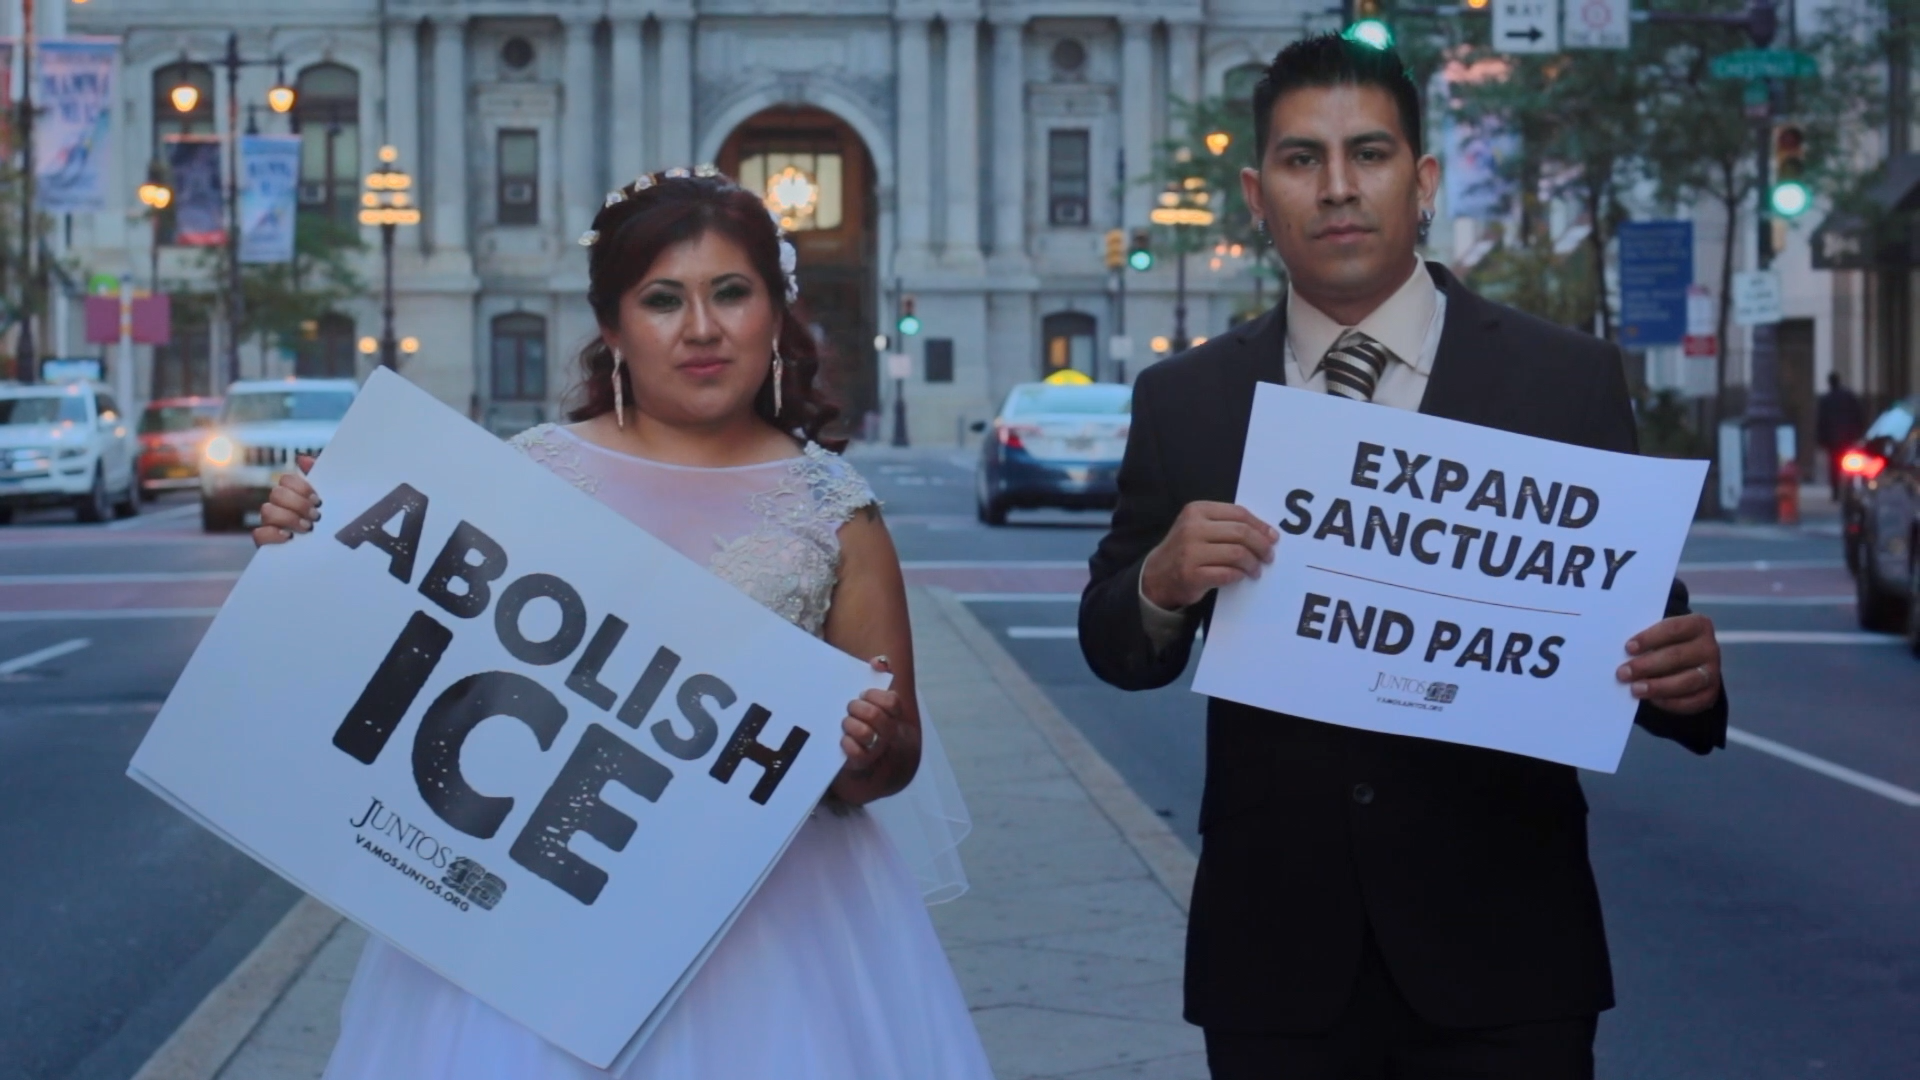 A film still from Expanding Sanctuary that shows a Latina woman wearing a white wedding gown and a Latino man wearing a black suit posing with blank expressions in front of Philadelphia City Hall holding posters that read "Abolish ICE" and "Expand Sanctuary, End PARS".